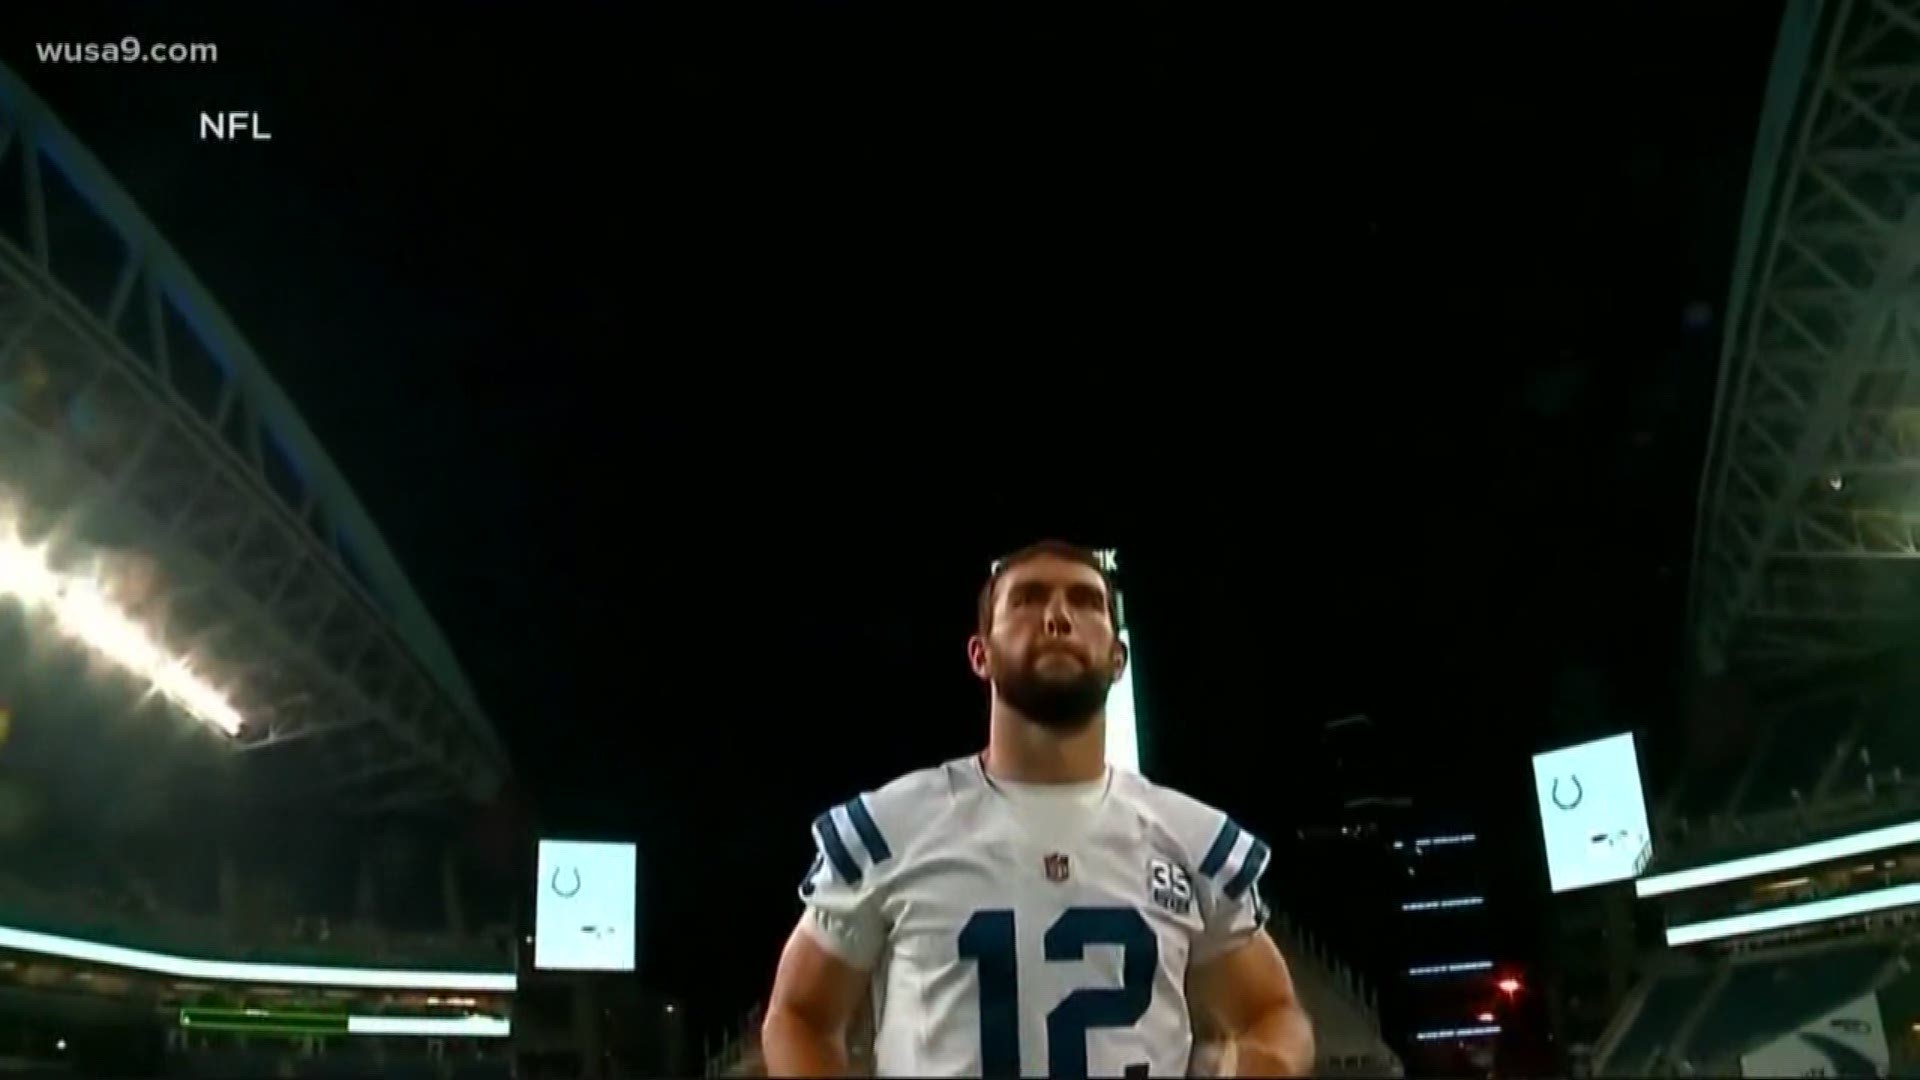 Pro bowl player Andrew Luck stunned the sports world by announcing his retirement from the Indianapolis Colts football at the age of 29. During his press conference he explained that dealing with the cycles of injury, pain, rehab, year after year, in season and out, left him feeling tired, physically and mentally and being stuck in this process. Fans of the game booed him and called him soft.